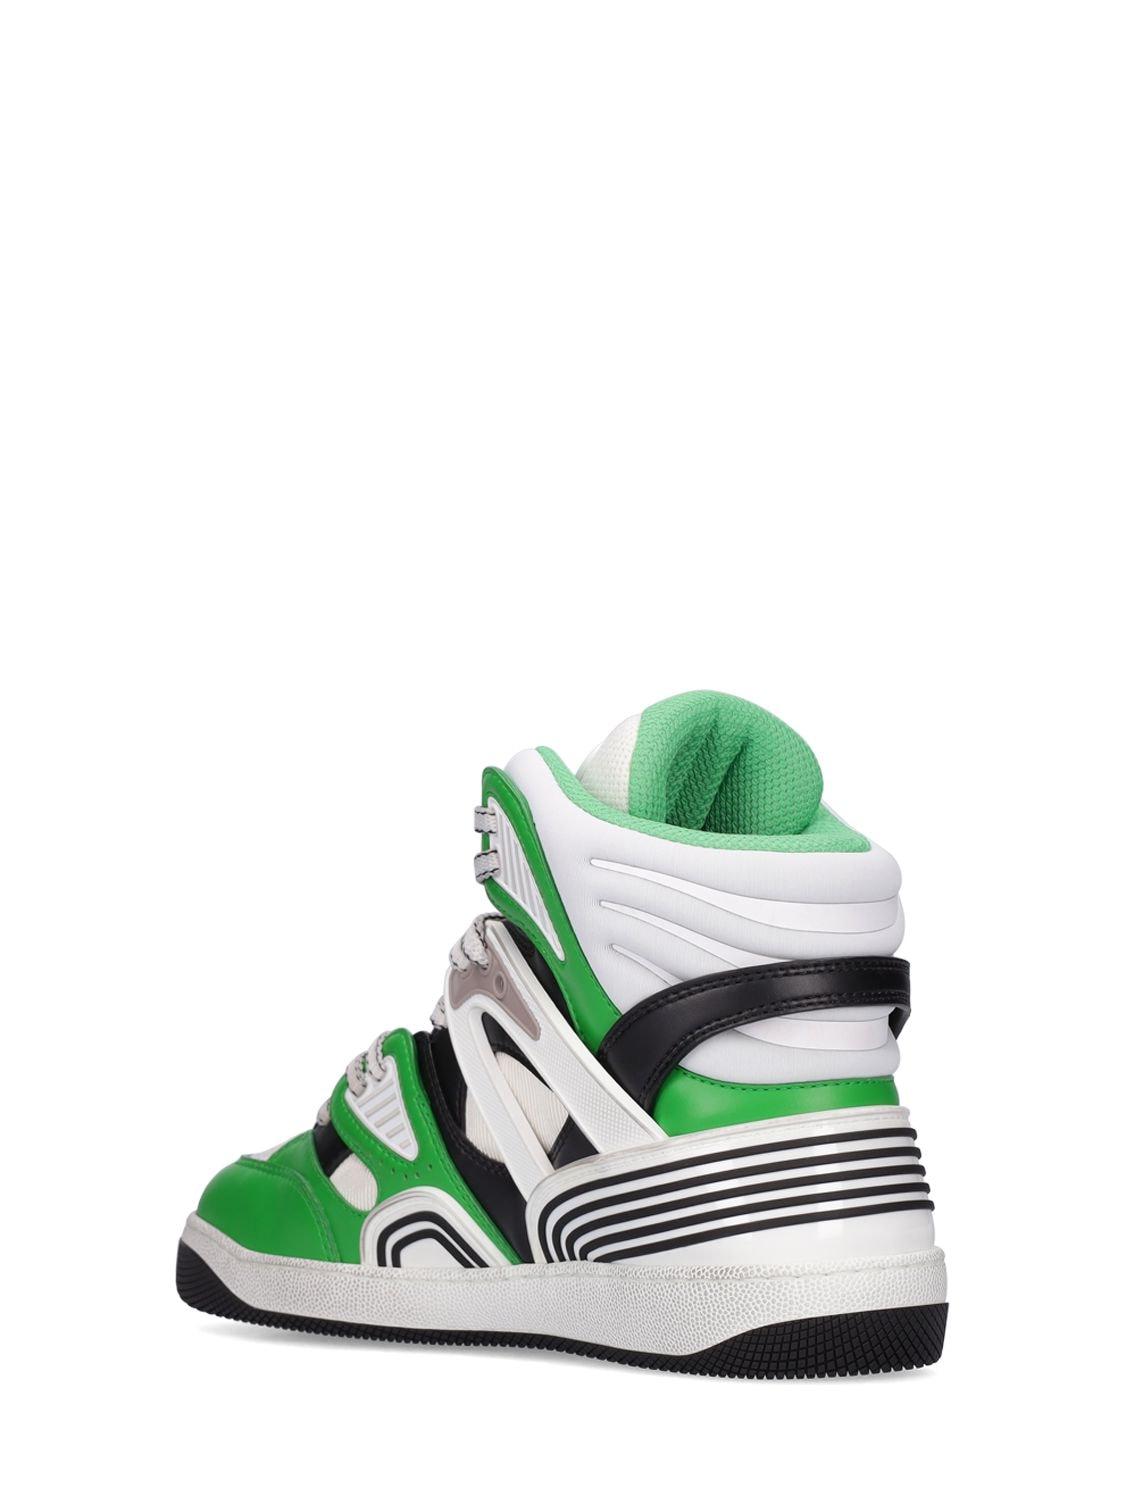 Gucci - Basket High-Top Sneakers - Men - Rubber/Rubber/Fabric - 11 - Green